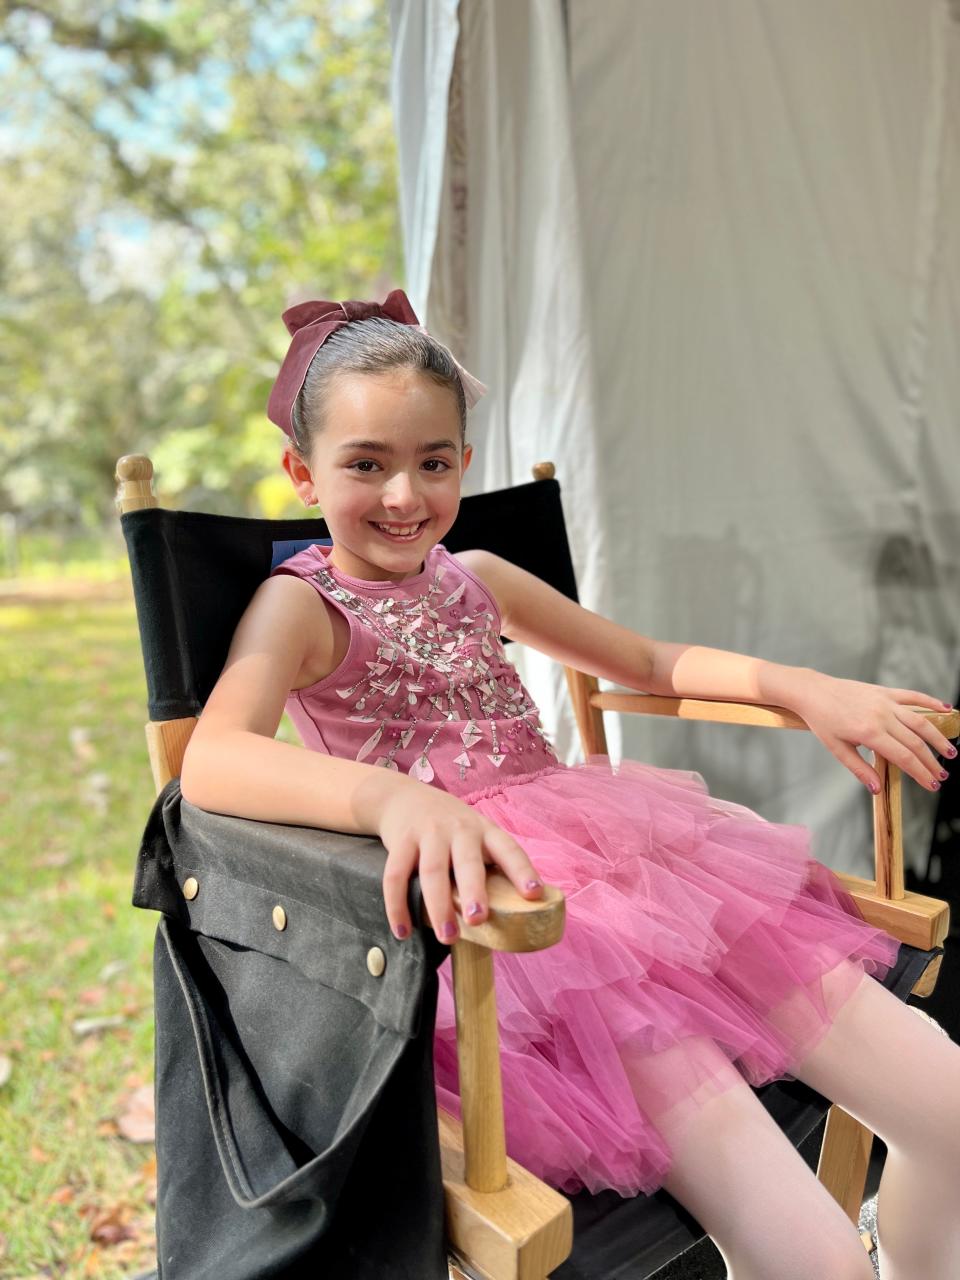 Actor Ella Grace Helton, 11, is pictured on the set of "Sweet Magnolias," a Netflix series now shooting its fourth season.